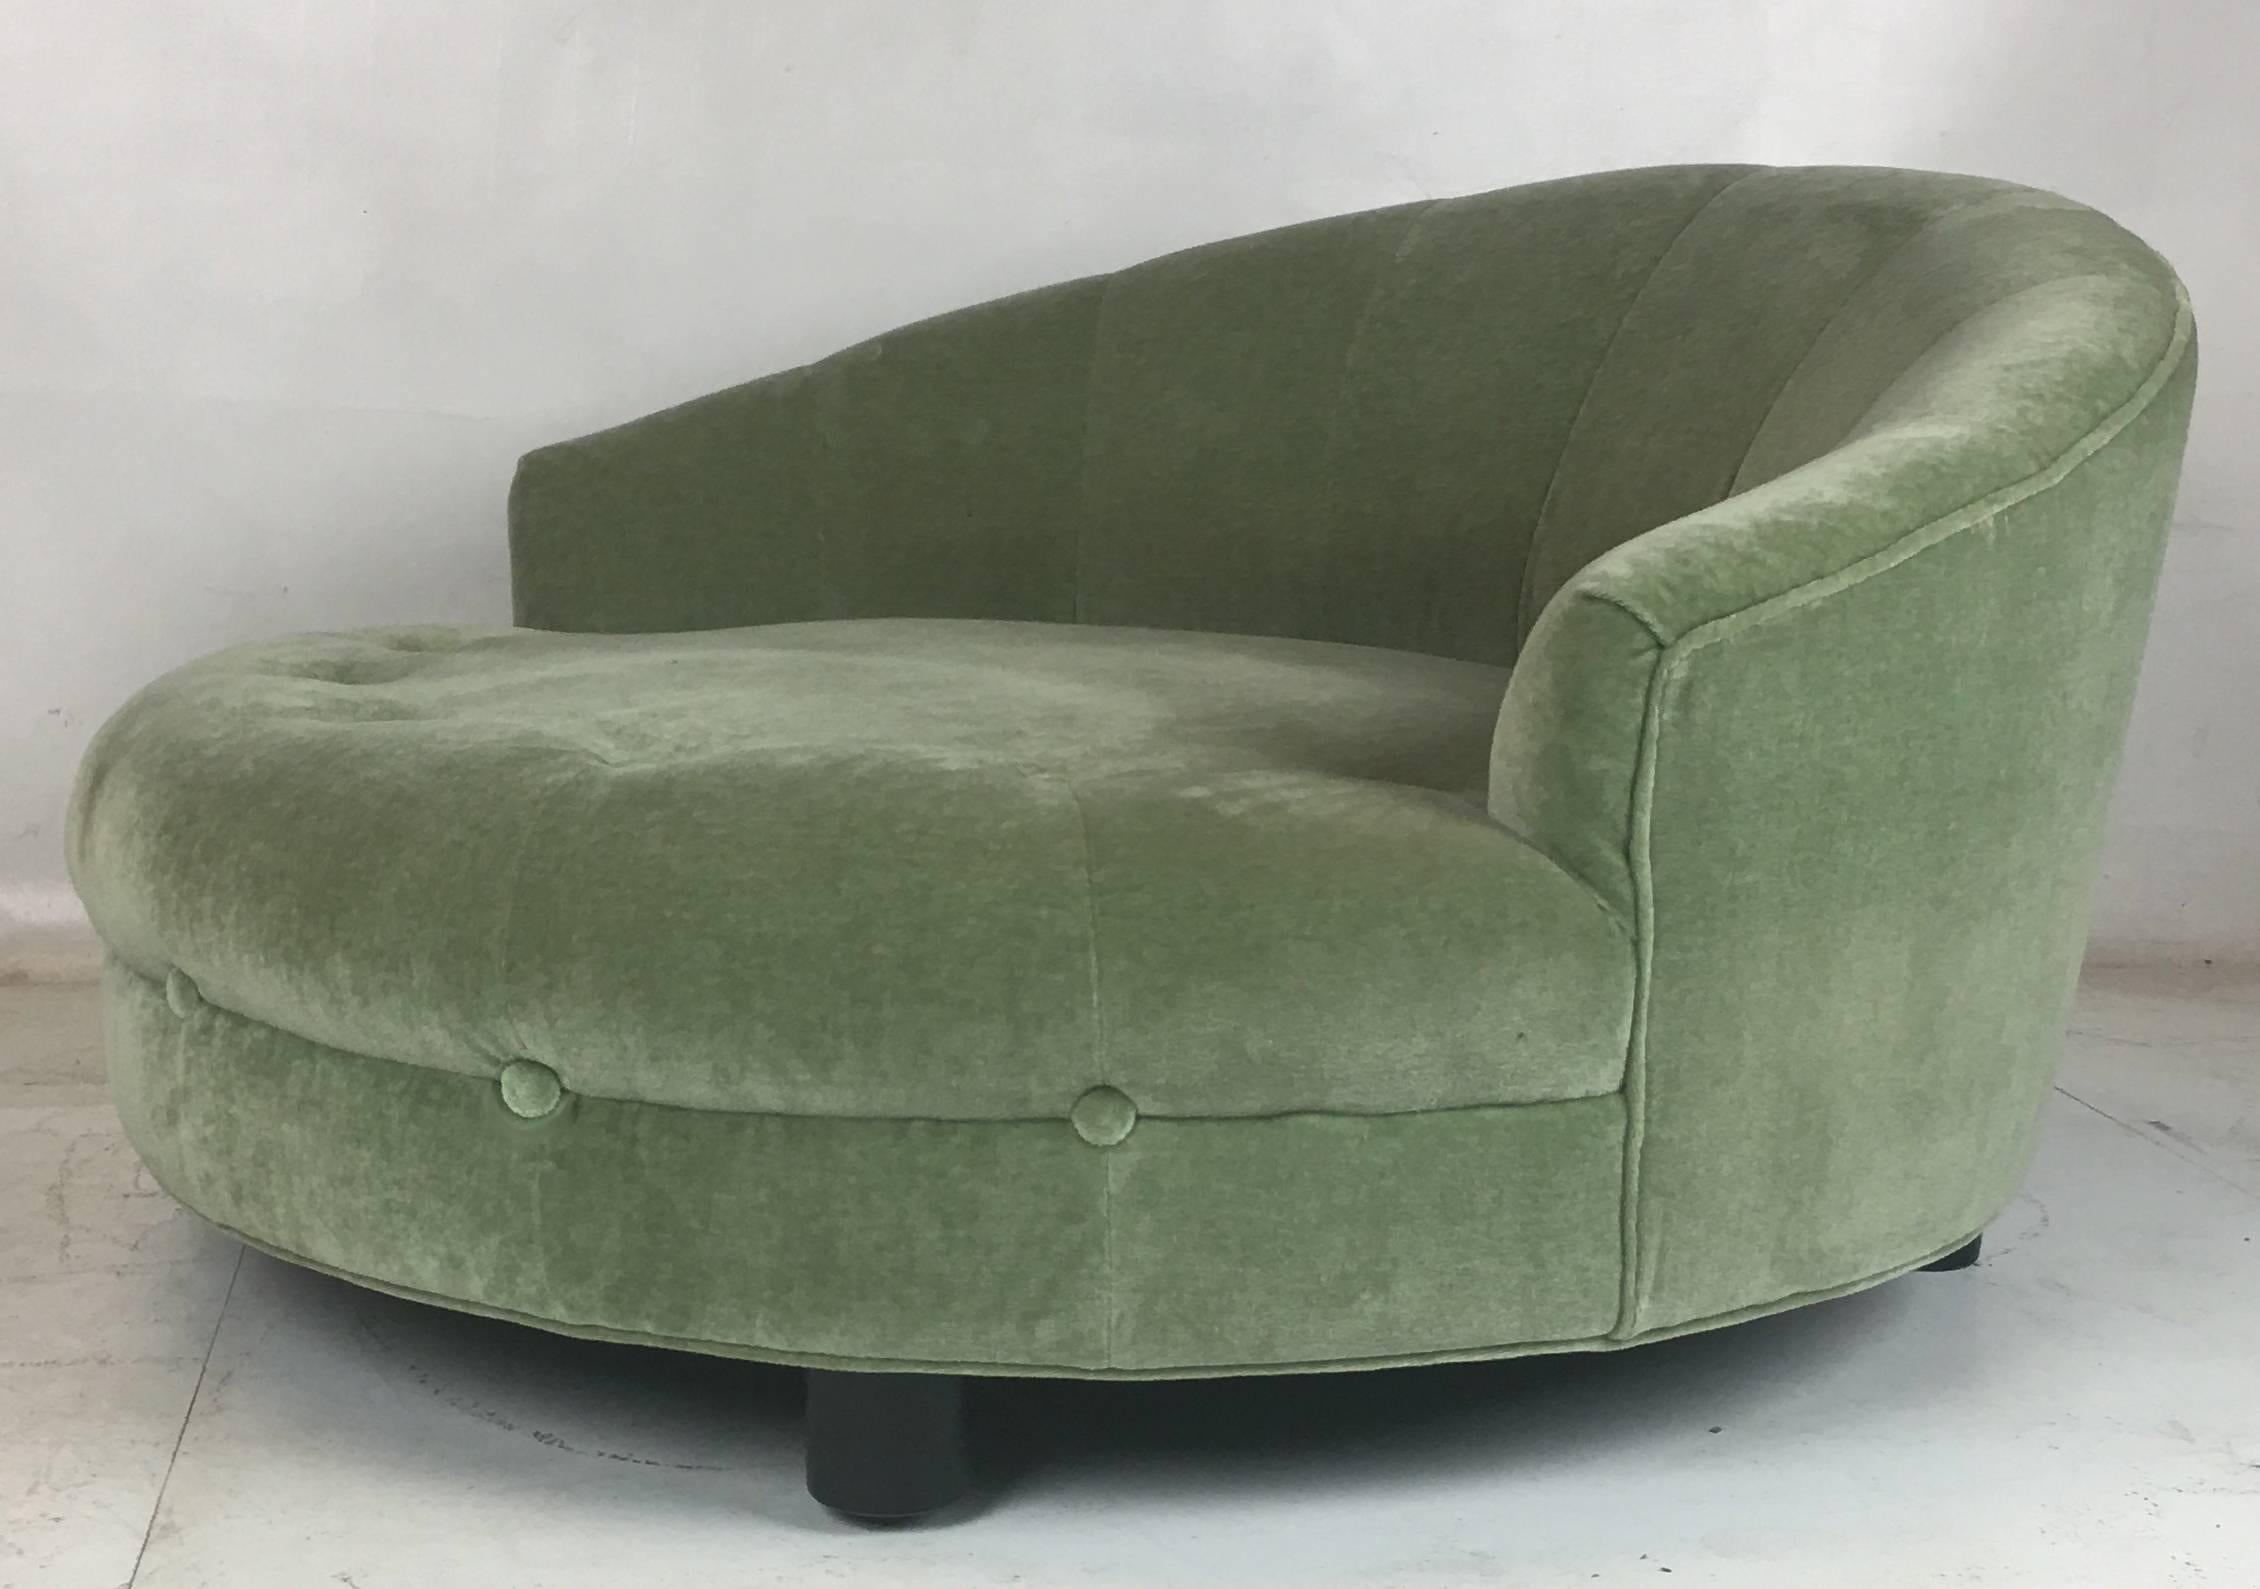 American Large Round Lounge Daybed Attributed to Milo Baughman